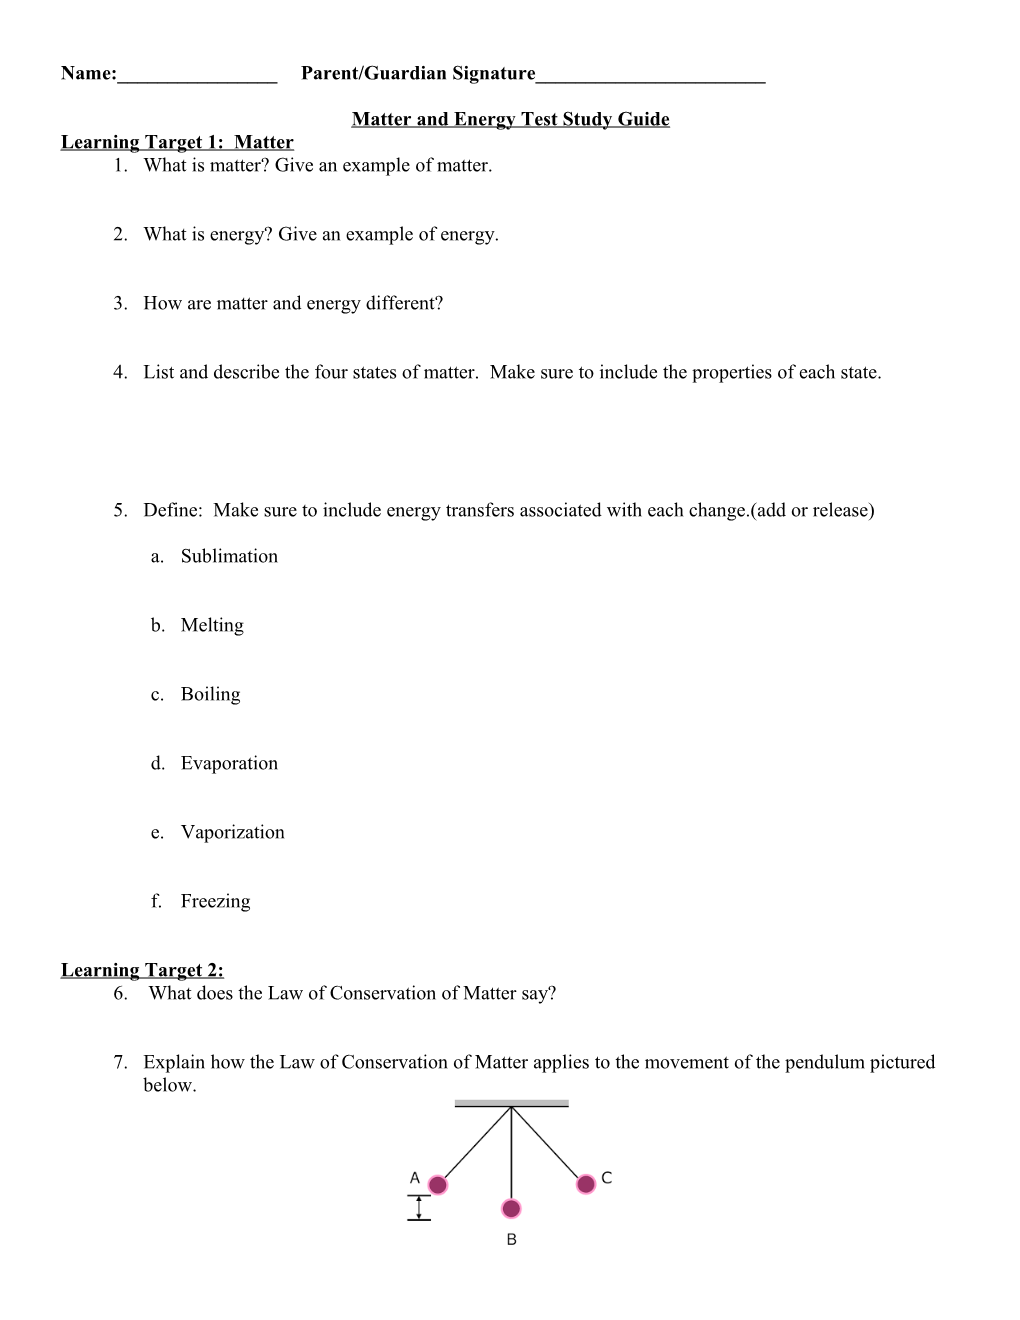 Chemistry Mastery Test Study Guide Over Learning Targets 1 - 3